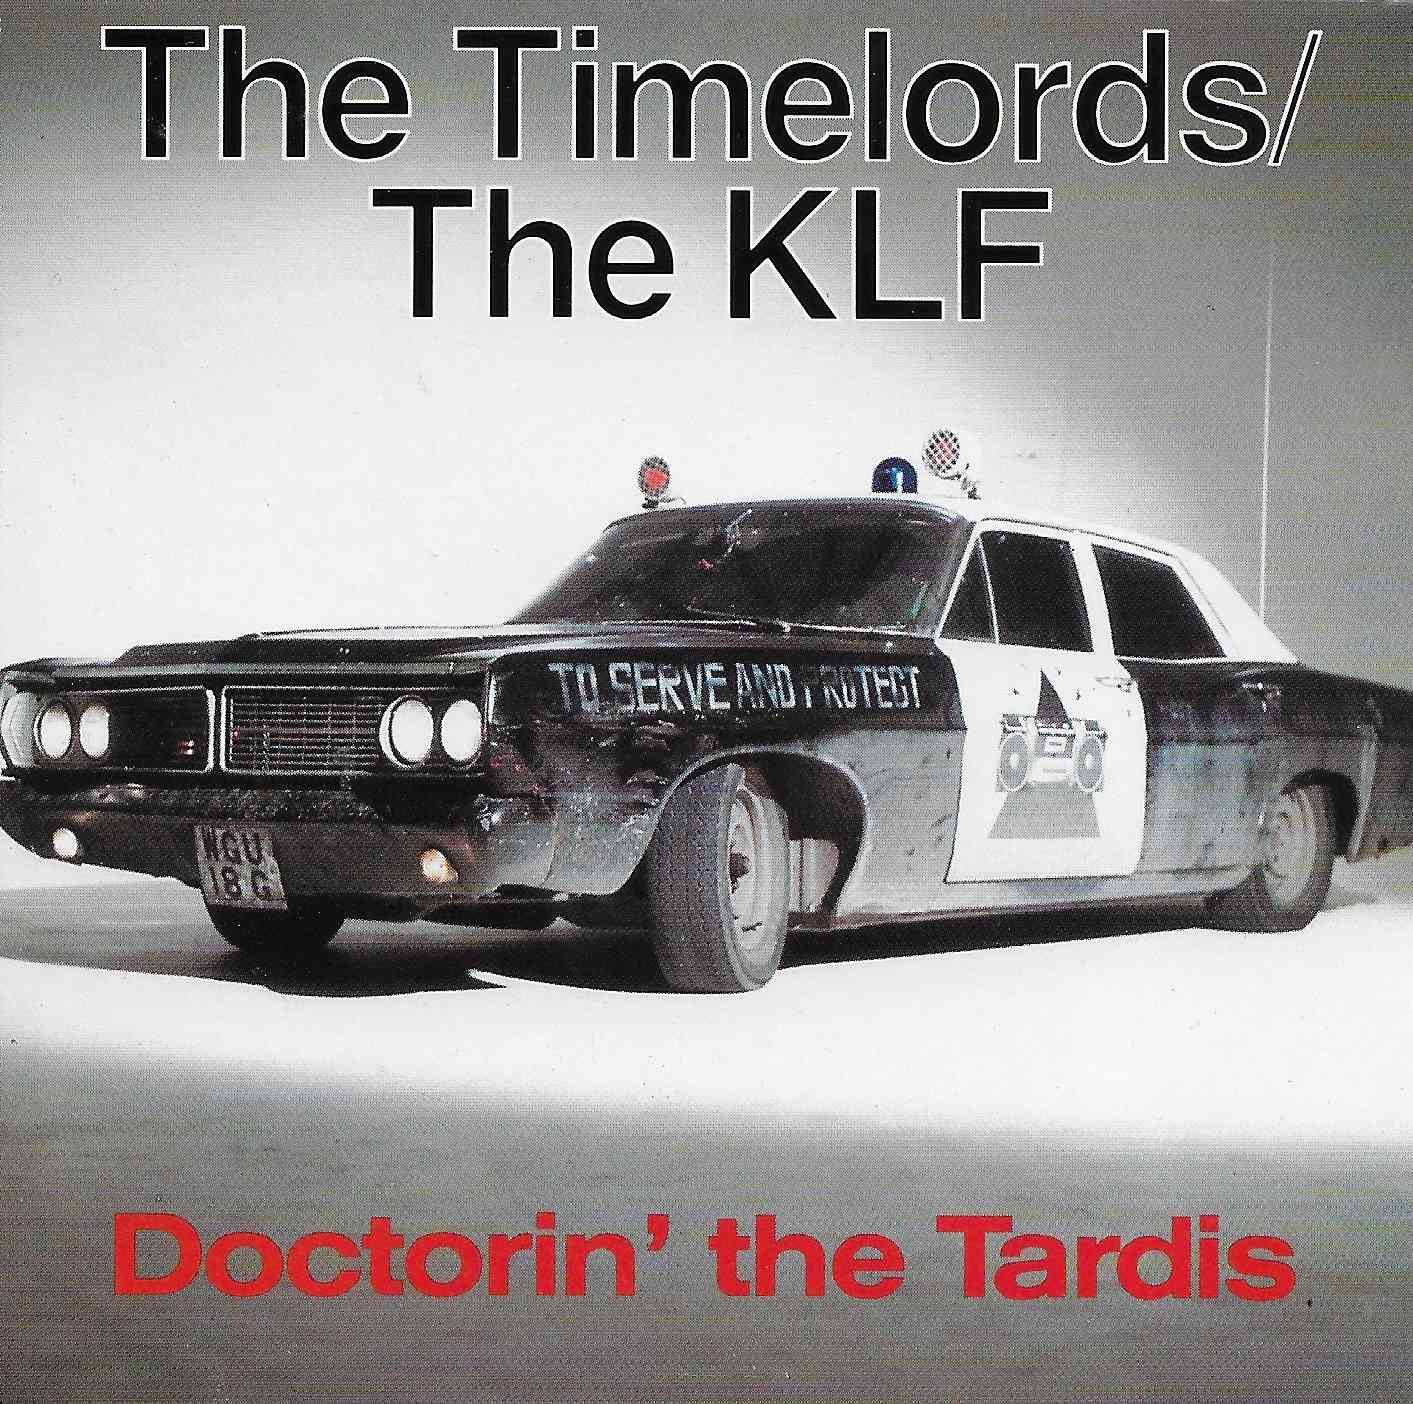 Picture of TVT 4025-2 Doctorin' the Tardis by artist Ron Grainer / The Timelords / KLF from the BBC cdsingles - Records and Tapes library